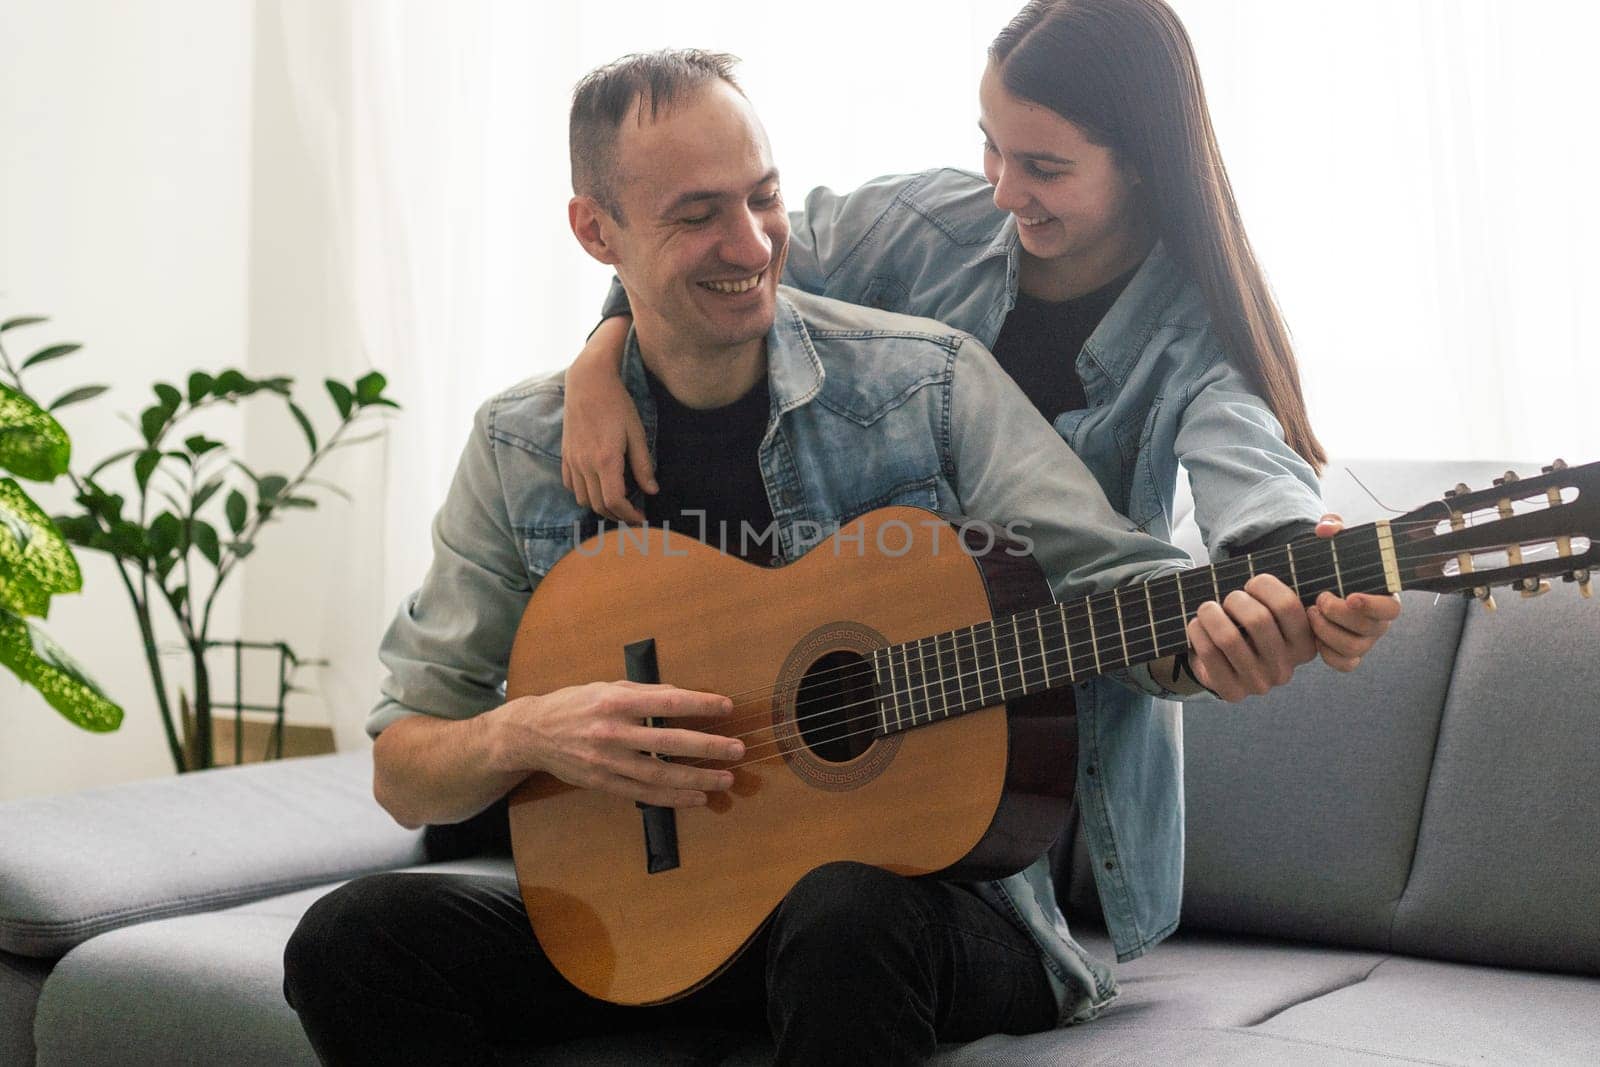 Father guy teaching girl teenager daughter guitar playing at home. Family musical lessons with strings instrument by Andelov13